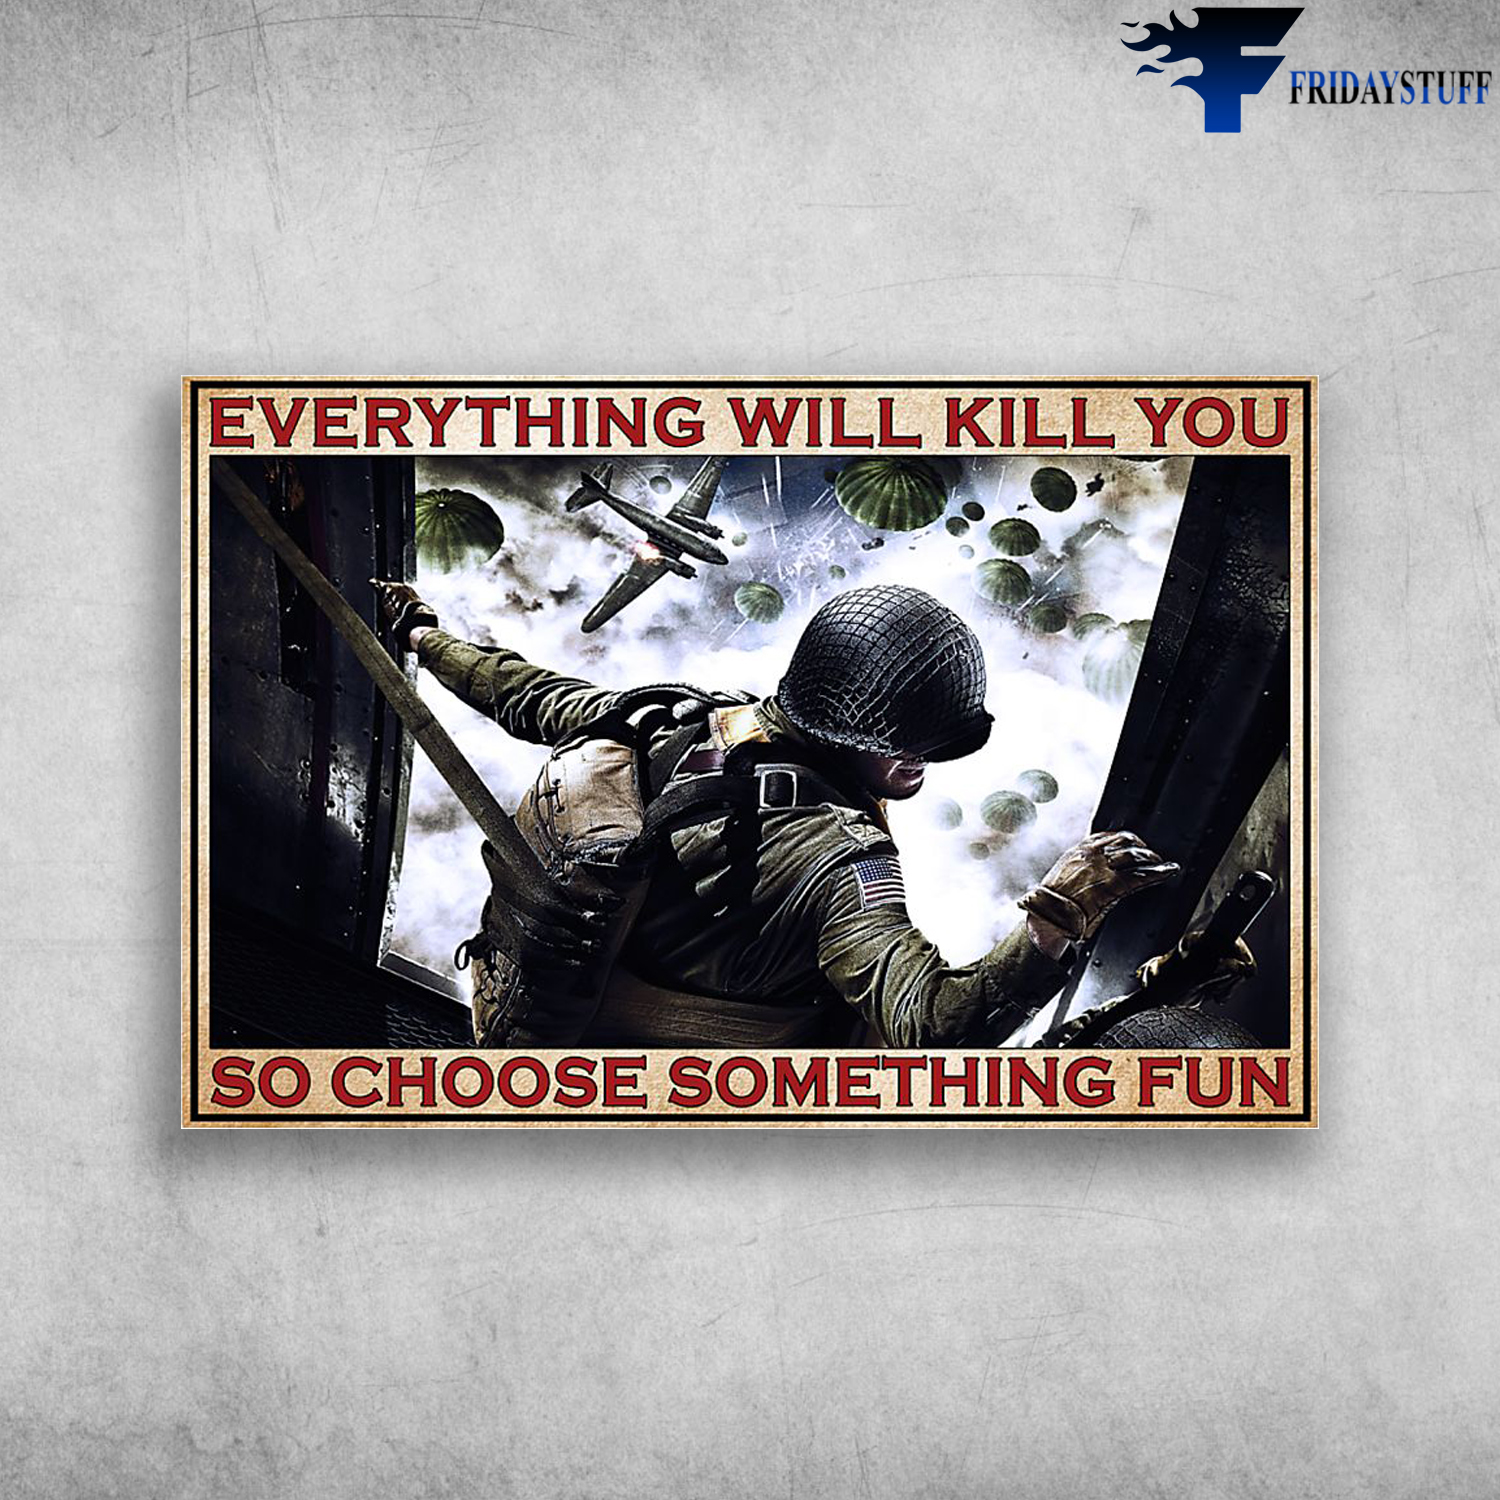 Paratroopers And Fighters - Everything Will Kill You, So Choose Something Fun